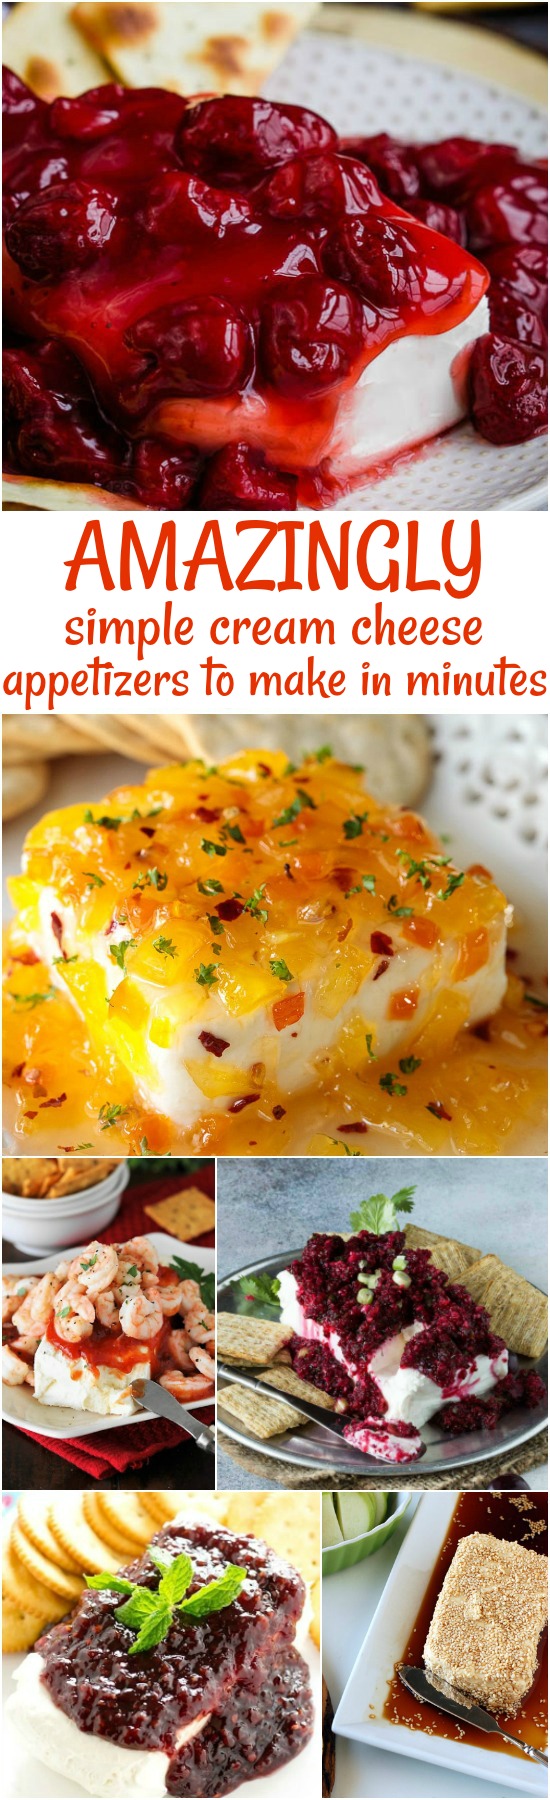 Easy Block Cream Cheese Appetizer Spreads that make a tasty last-minute appetizer with just a few ingredients.